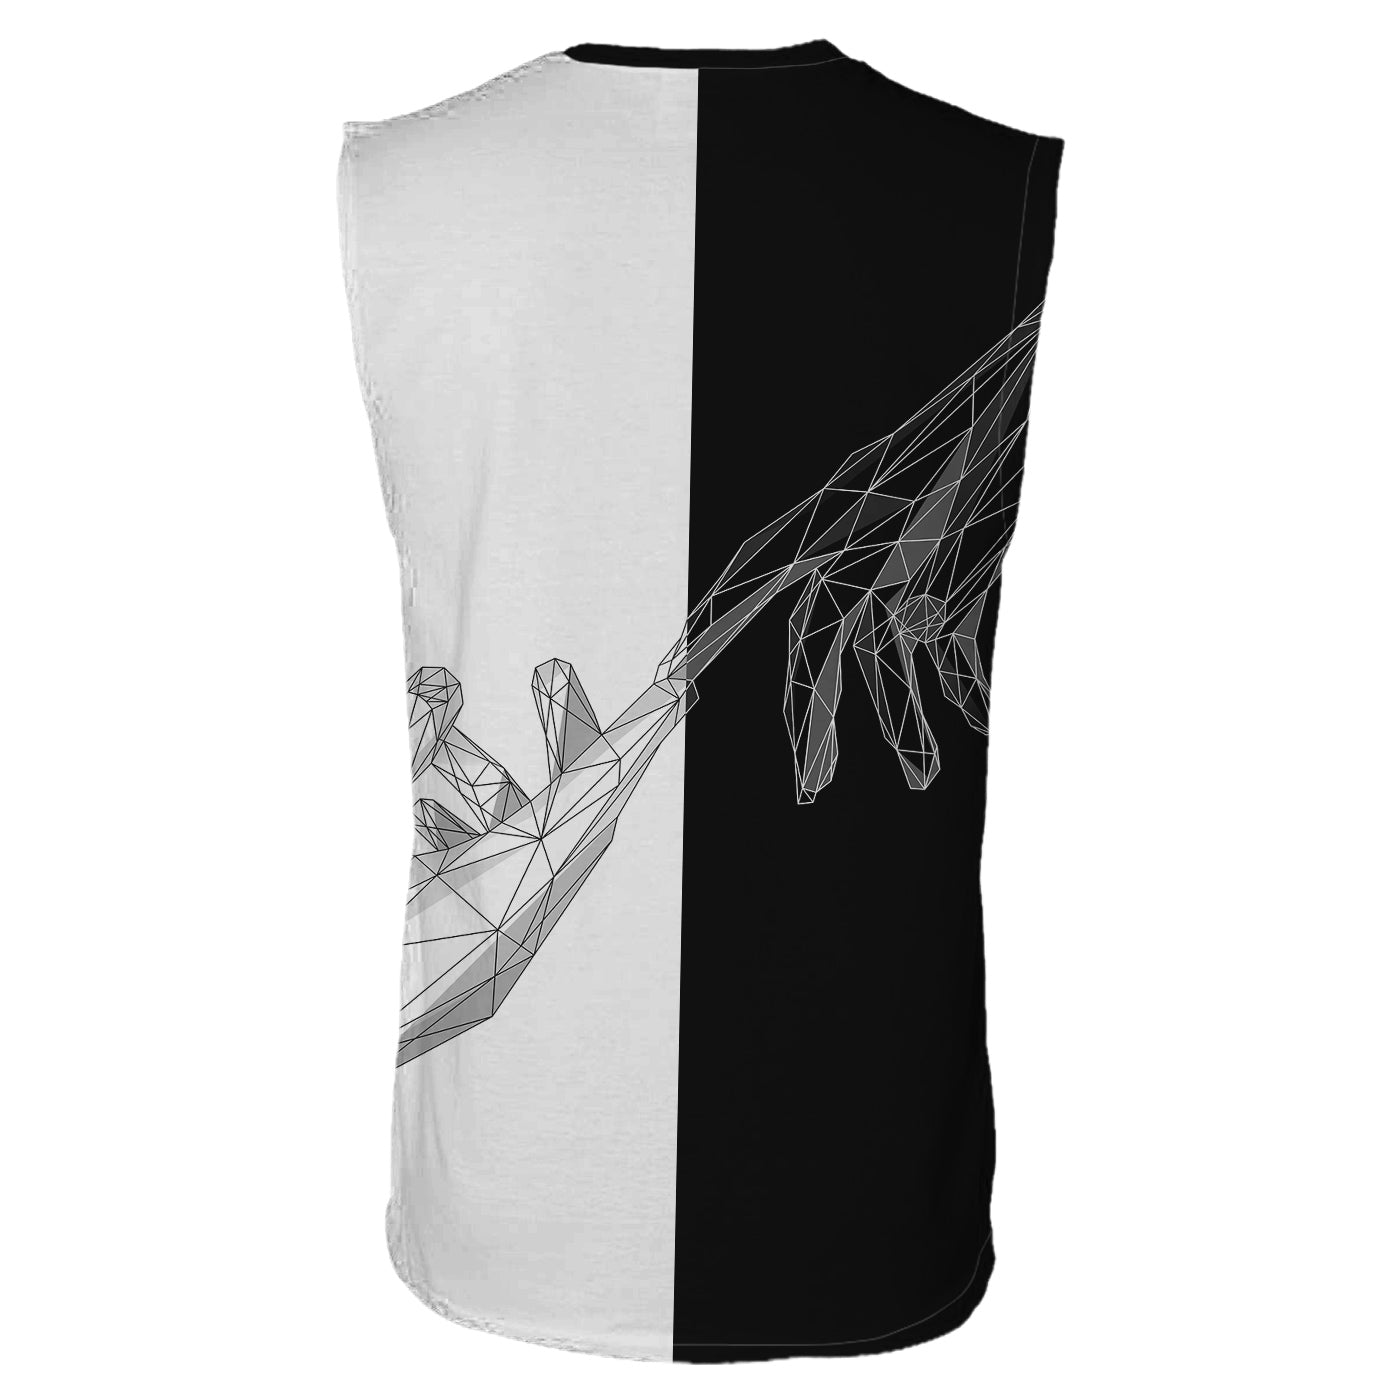 Together In Peace Sleeveless T-Shirt